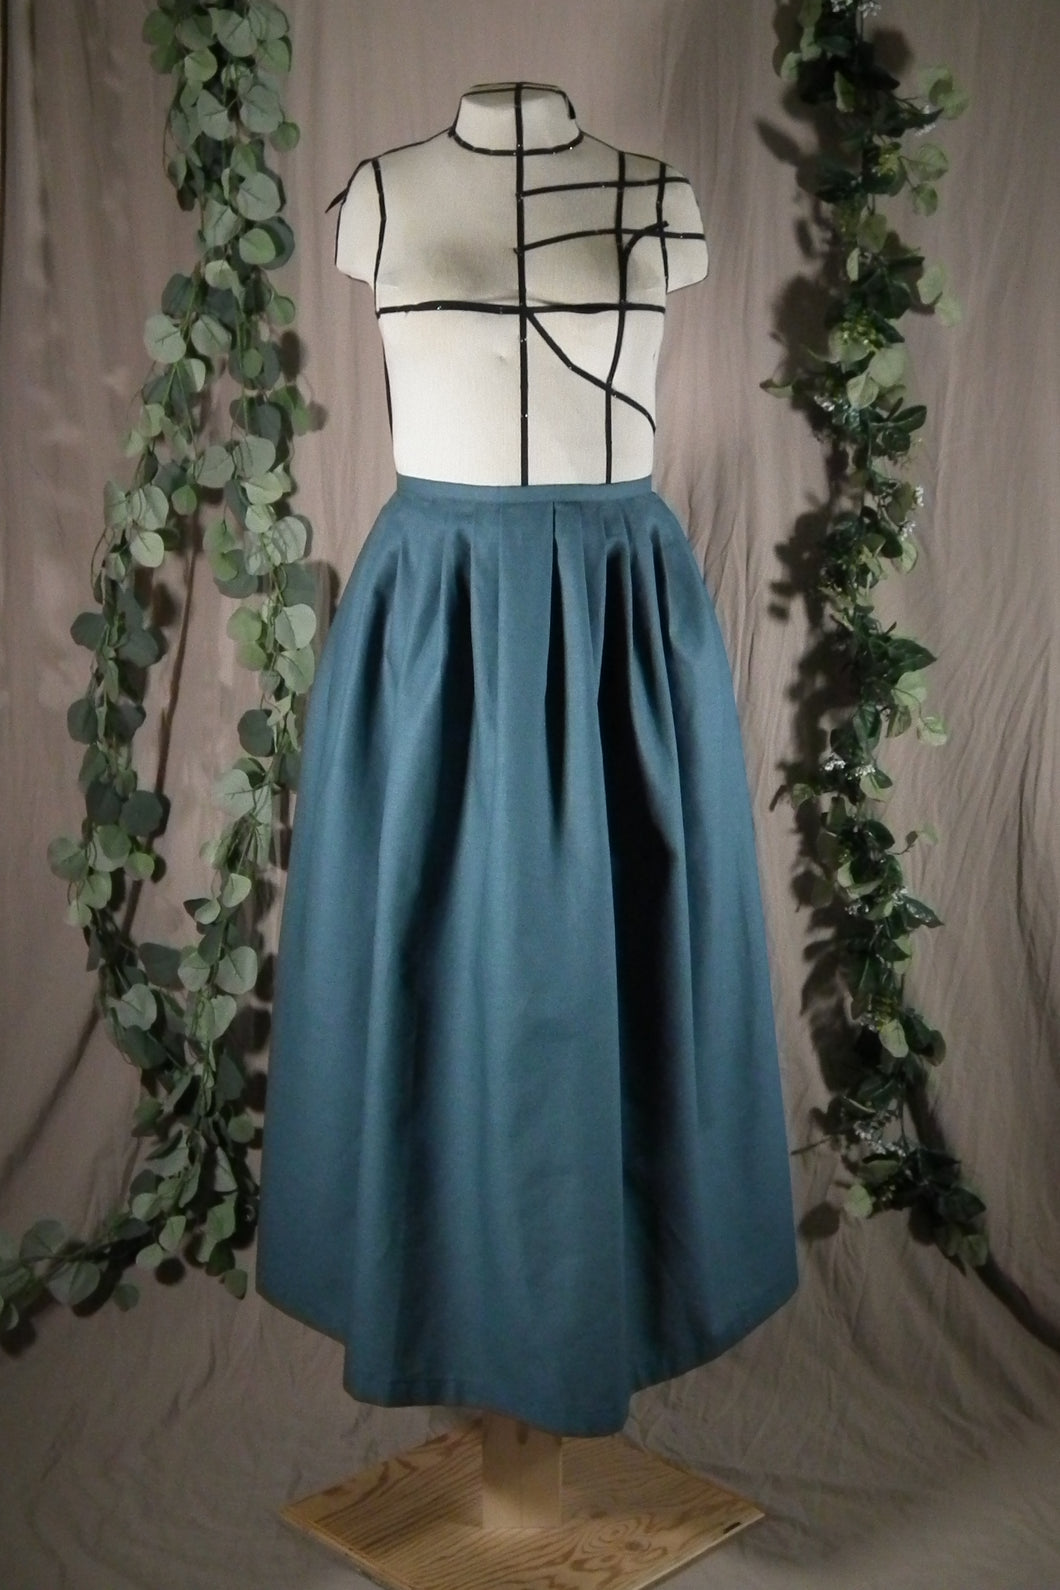 The front view of an ankle-length forest green skirt in a crisp woven fabric, with pleats at the narrow waistband, on a dressform in a studio, with some fake green vines in the background.